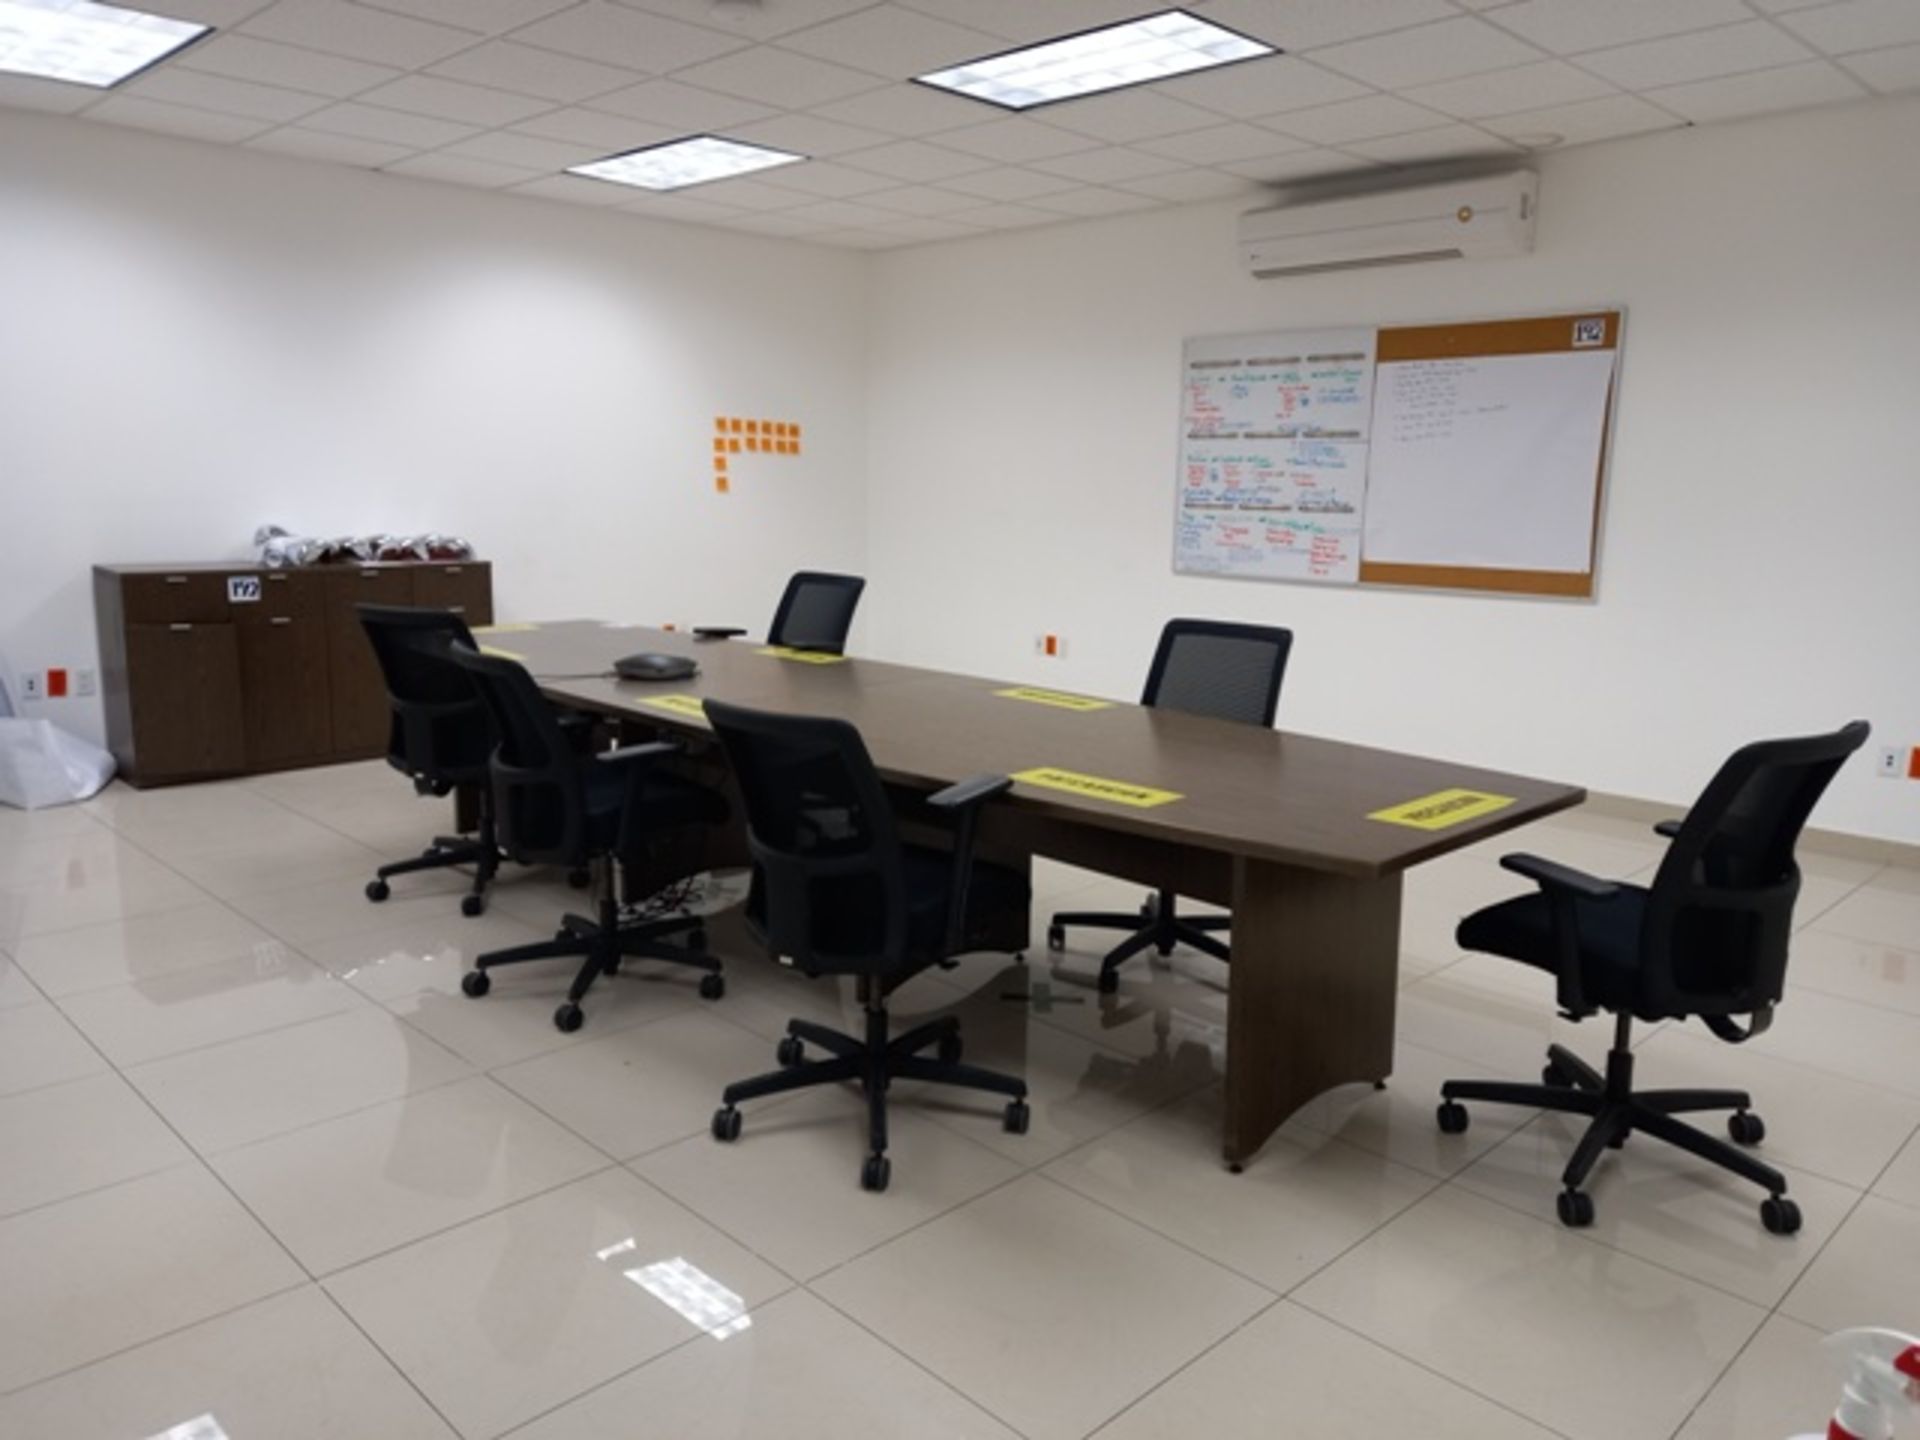 (16) Pcs Office Furniture Consisting Of: (1) 12 People Meeting Room Table, (6) Swivel, and more - Image 3 of 18